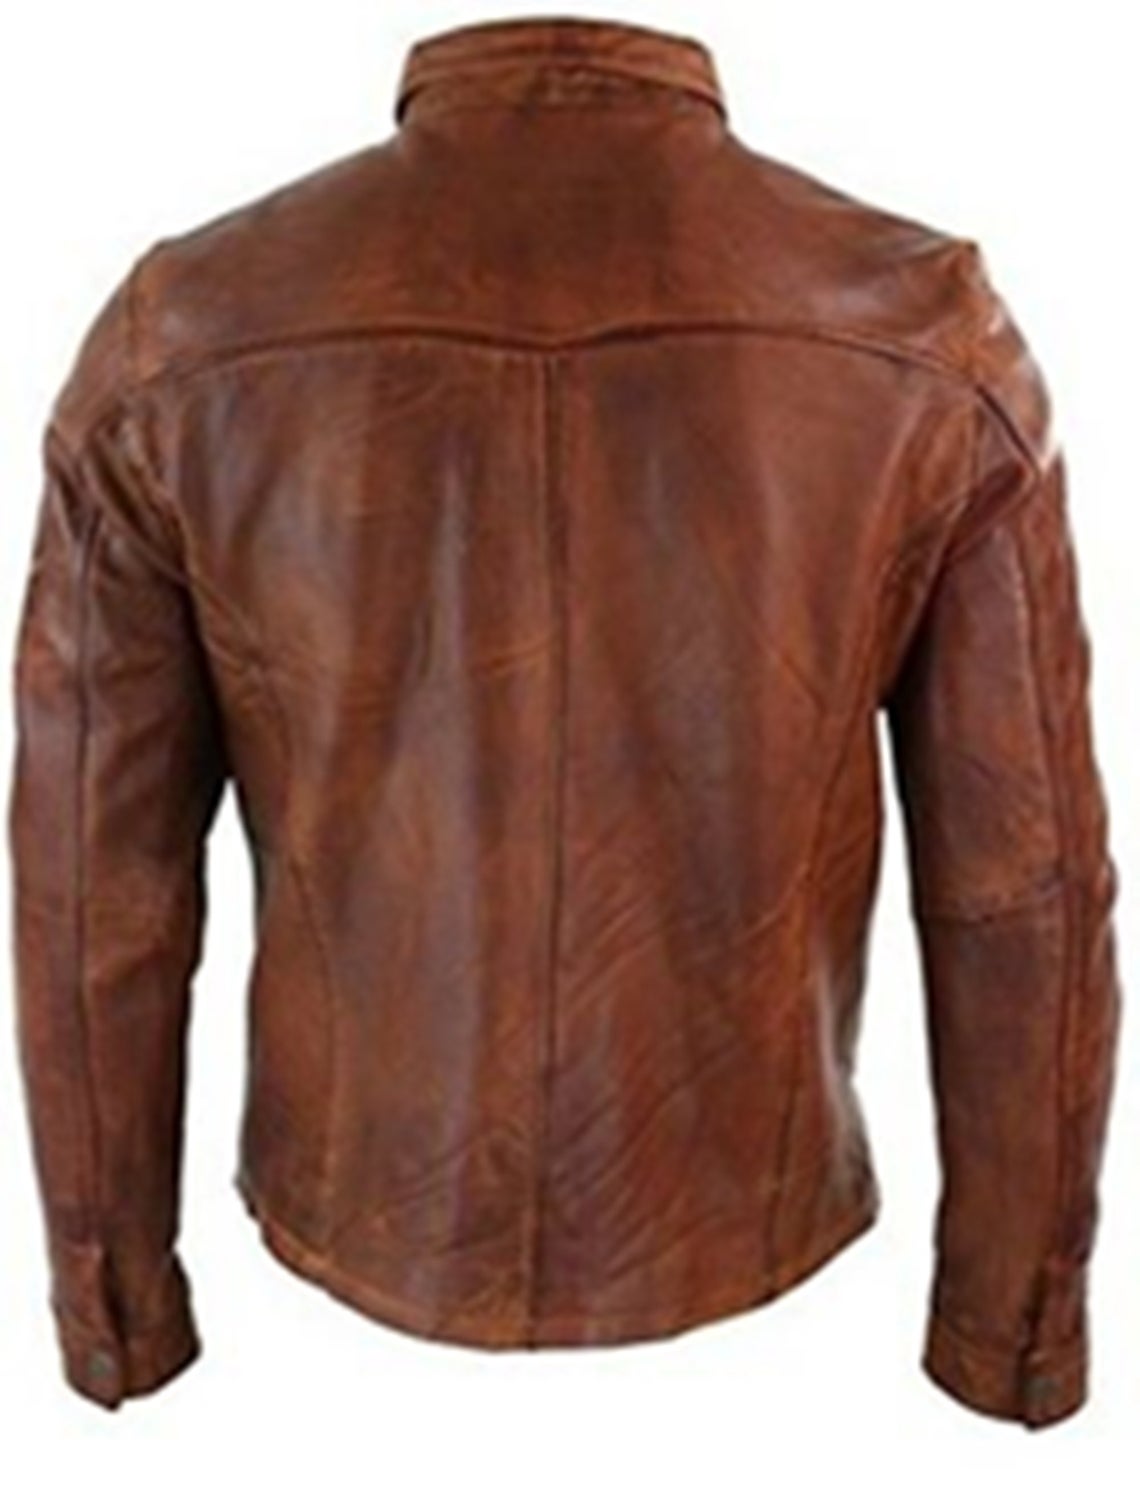 Mens Casual Biker Vintage Waxed Distressed Brown Real Leather Shirt Retro Moto